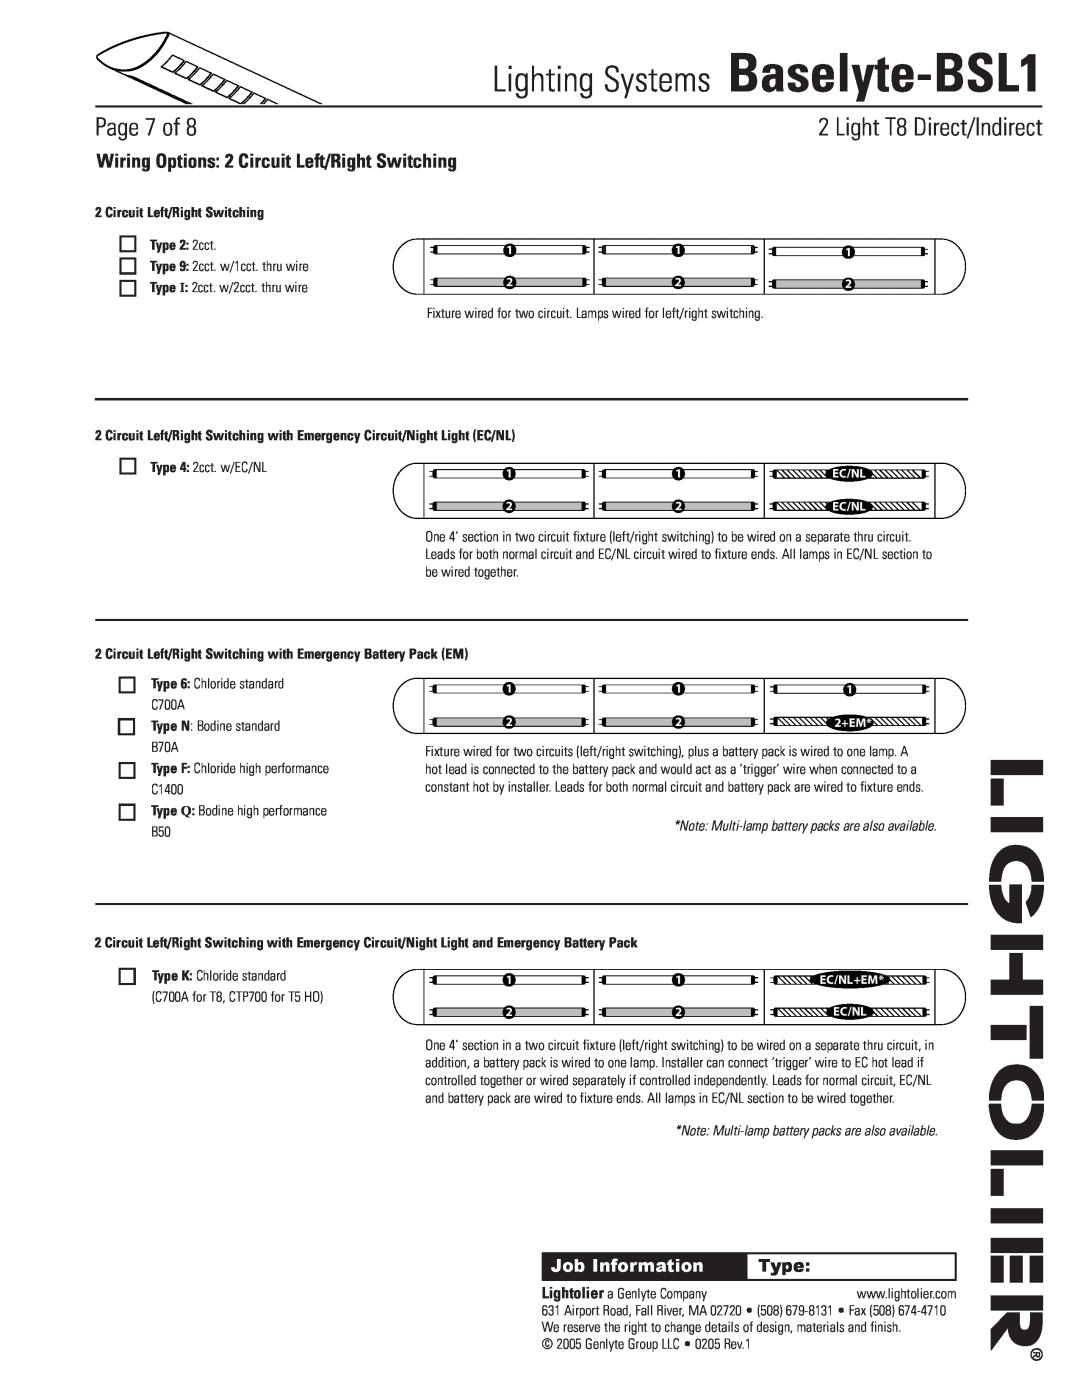 Lightolier Baselyte-BSL1 Wiring Options 2 Circuit Left/Right Switching, Circuit Left/Right Switching Type 2 2cct, Page of 